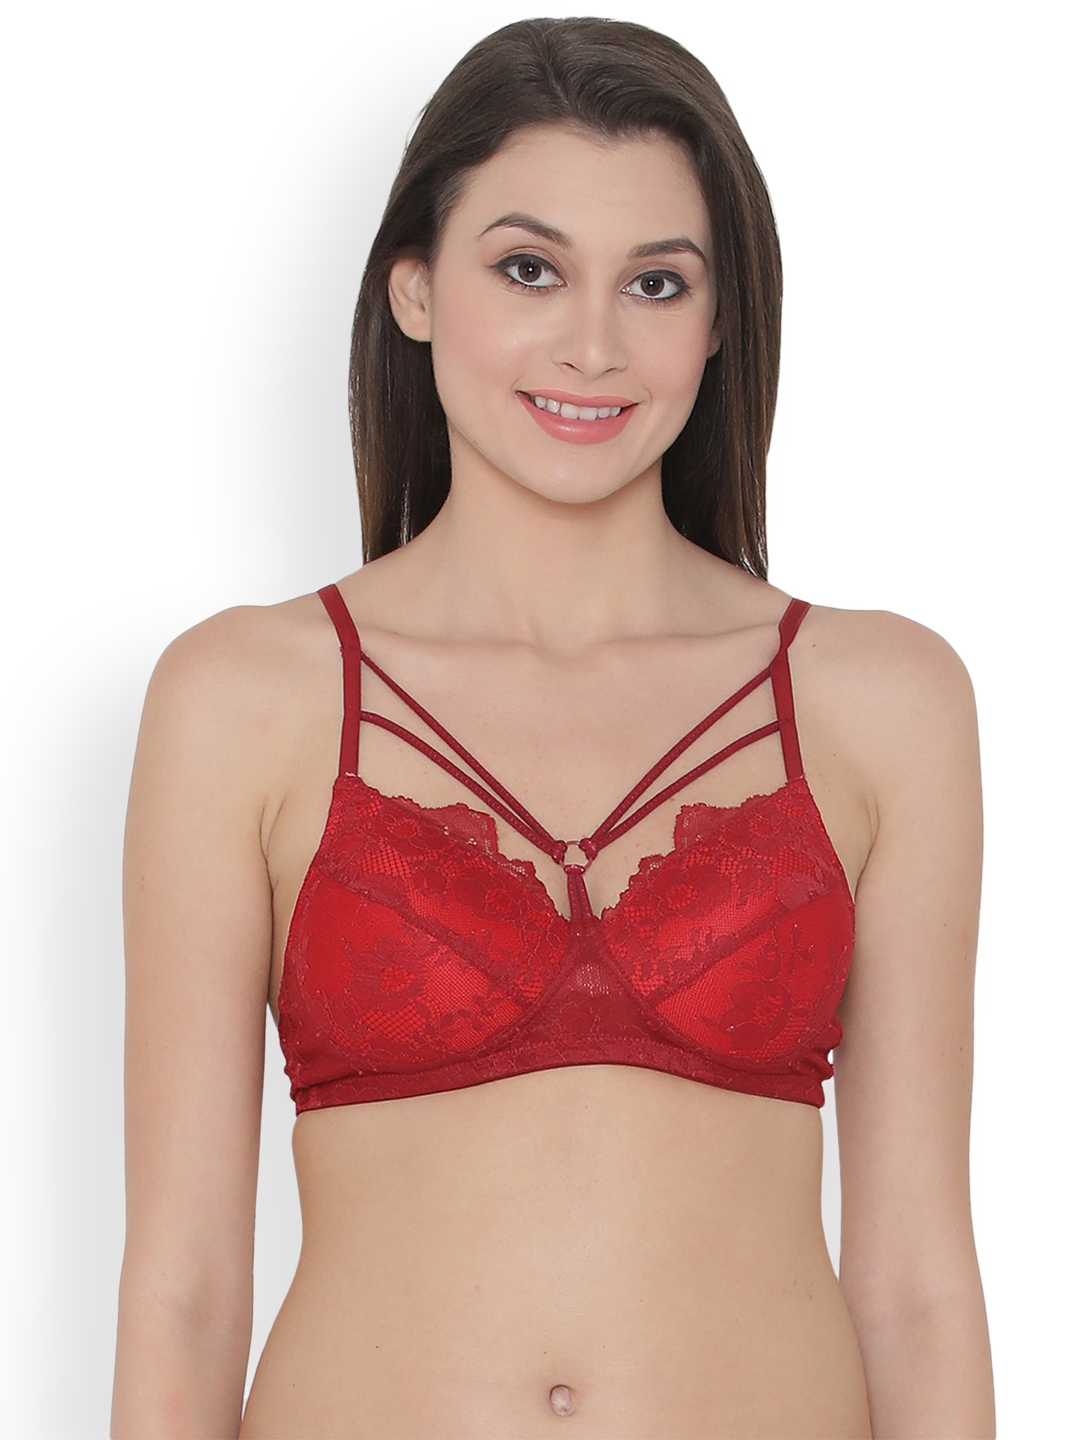 Buy Clovia Lace Padded Non Wired Front Cage Bra - Bra for Women 6622843